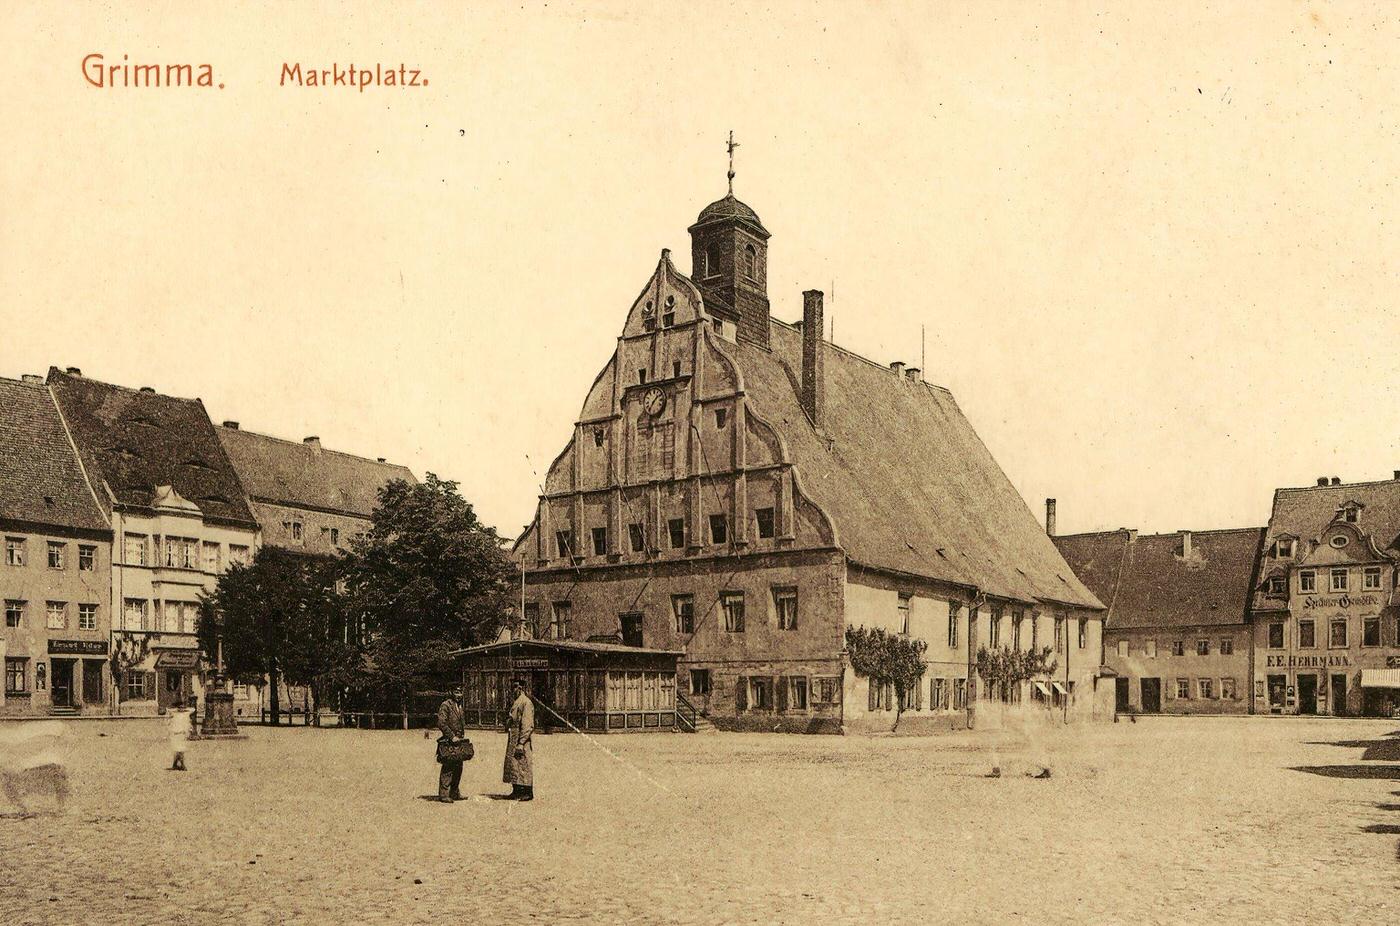 Markt, Rathaus Grimma, Buildings in Grimma, Germany, 1903.